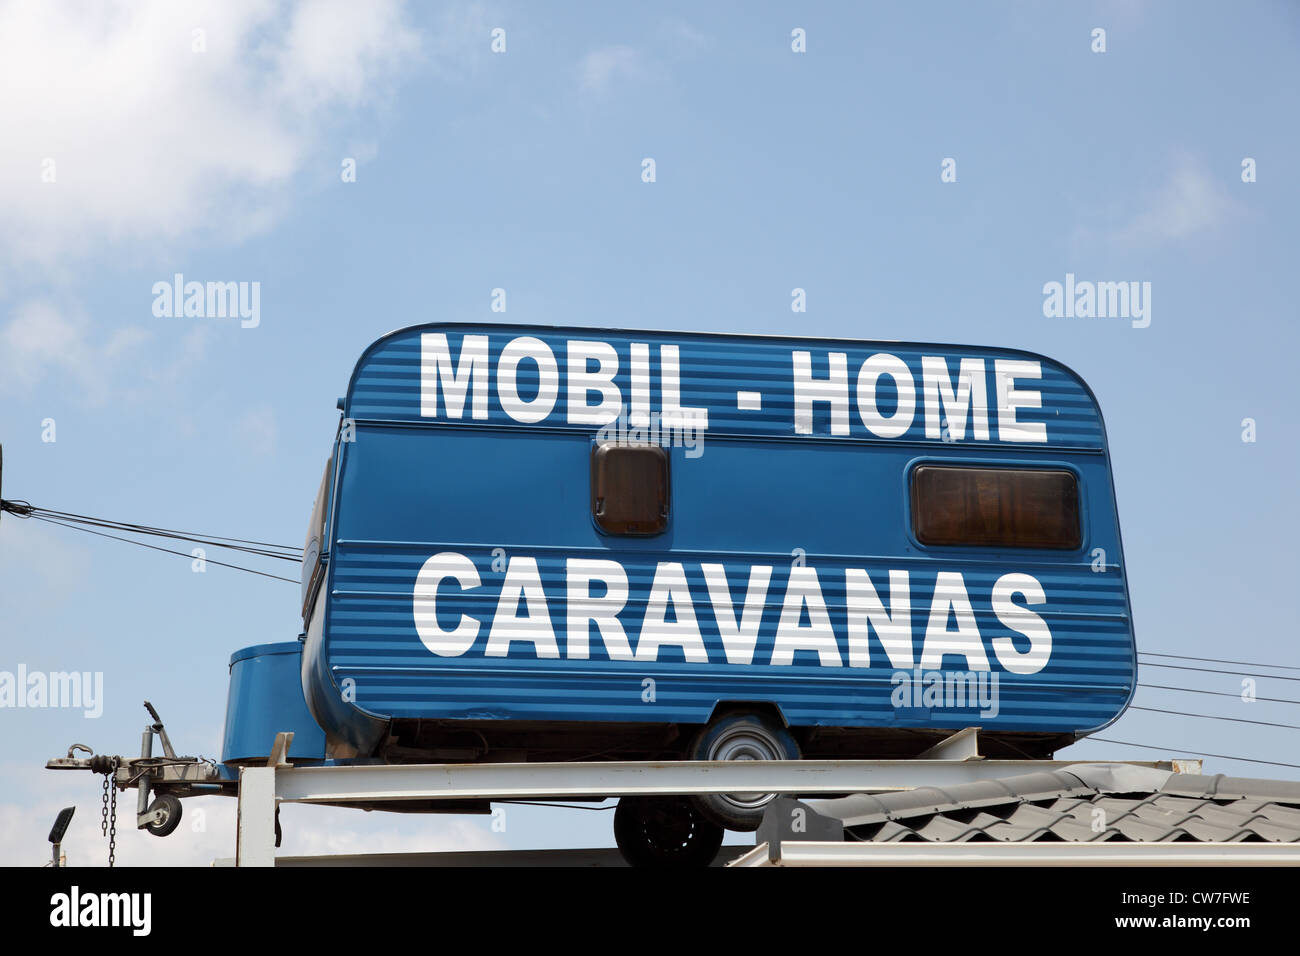 Mobile home and caravan shop in spain Stock Photo